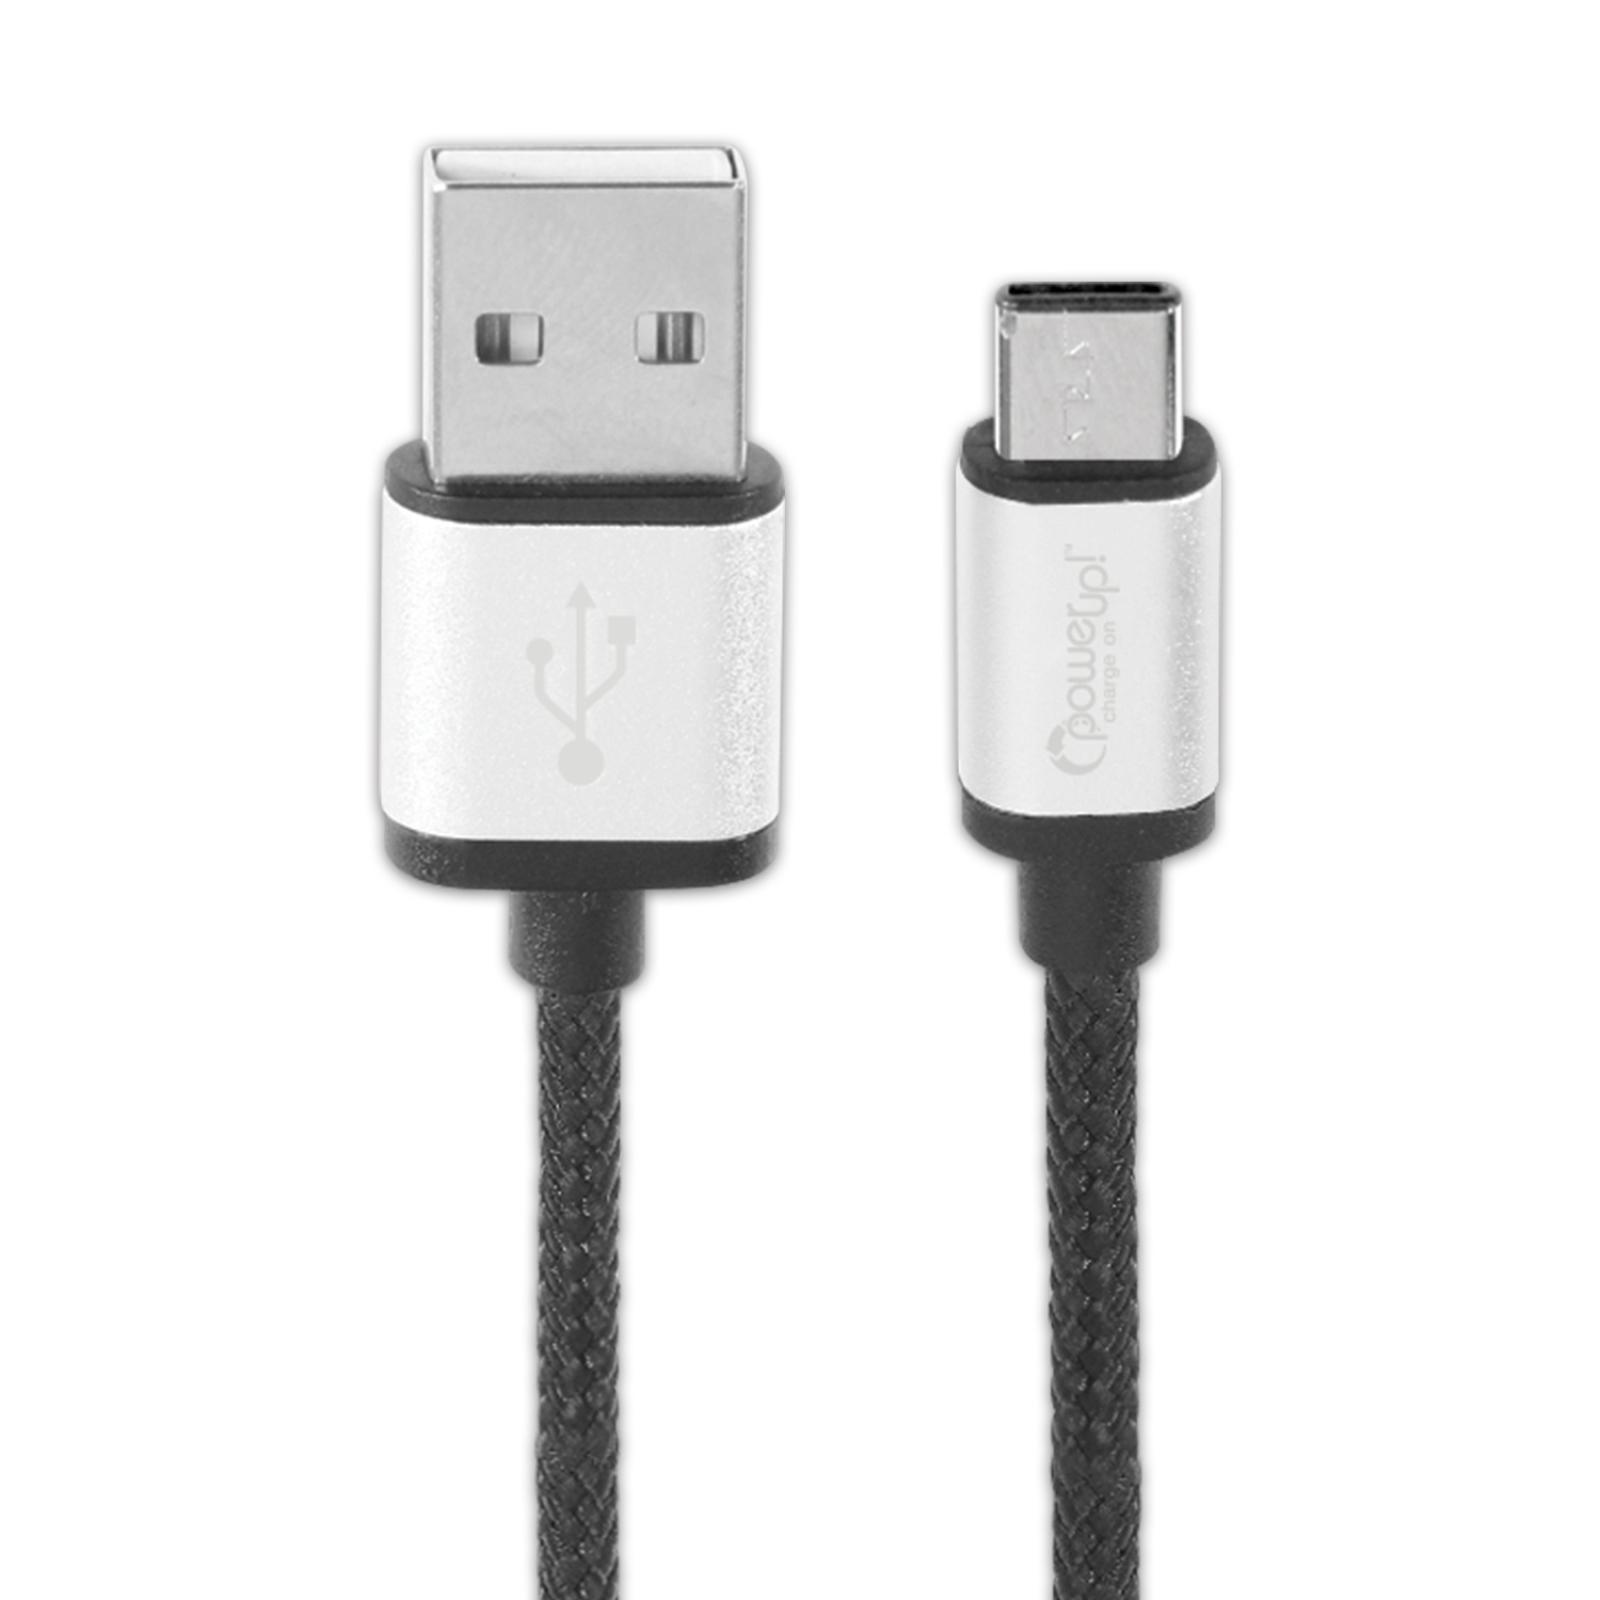 PowerUp! Charge On™ Braided Type C USB Cable